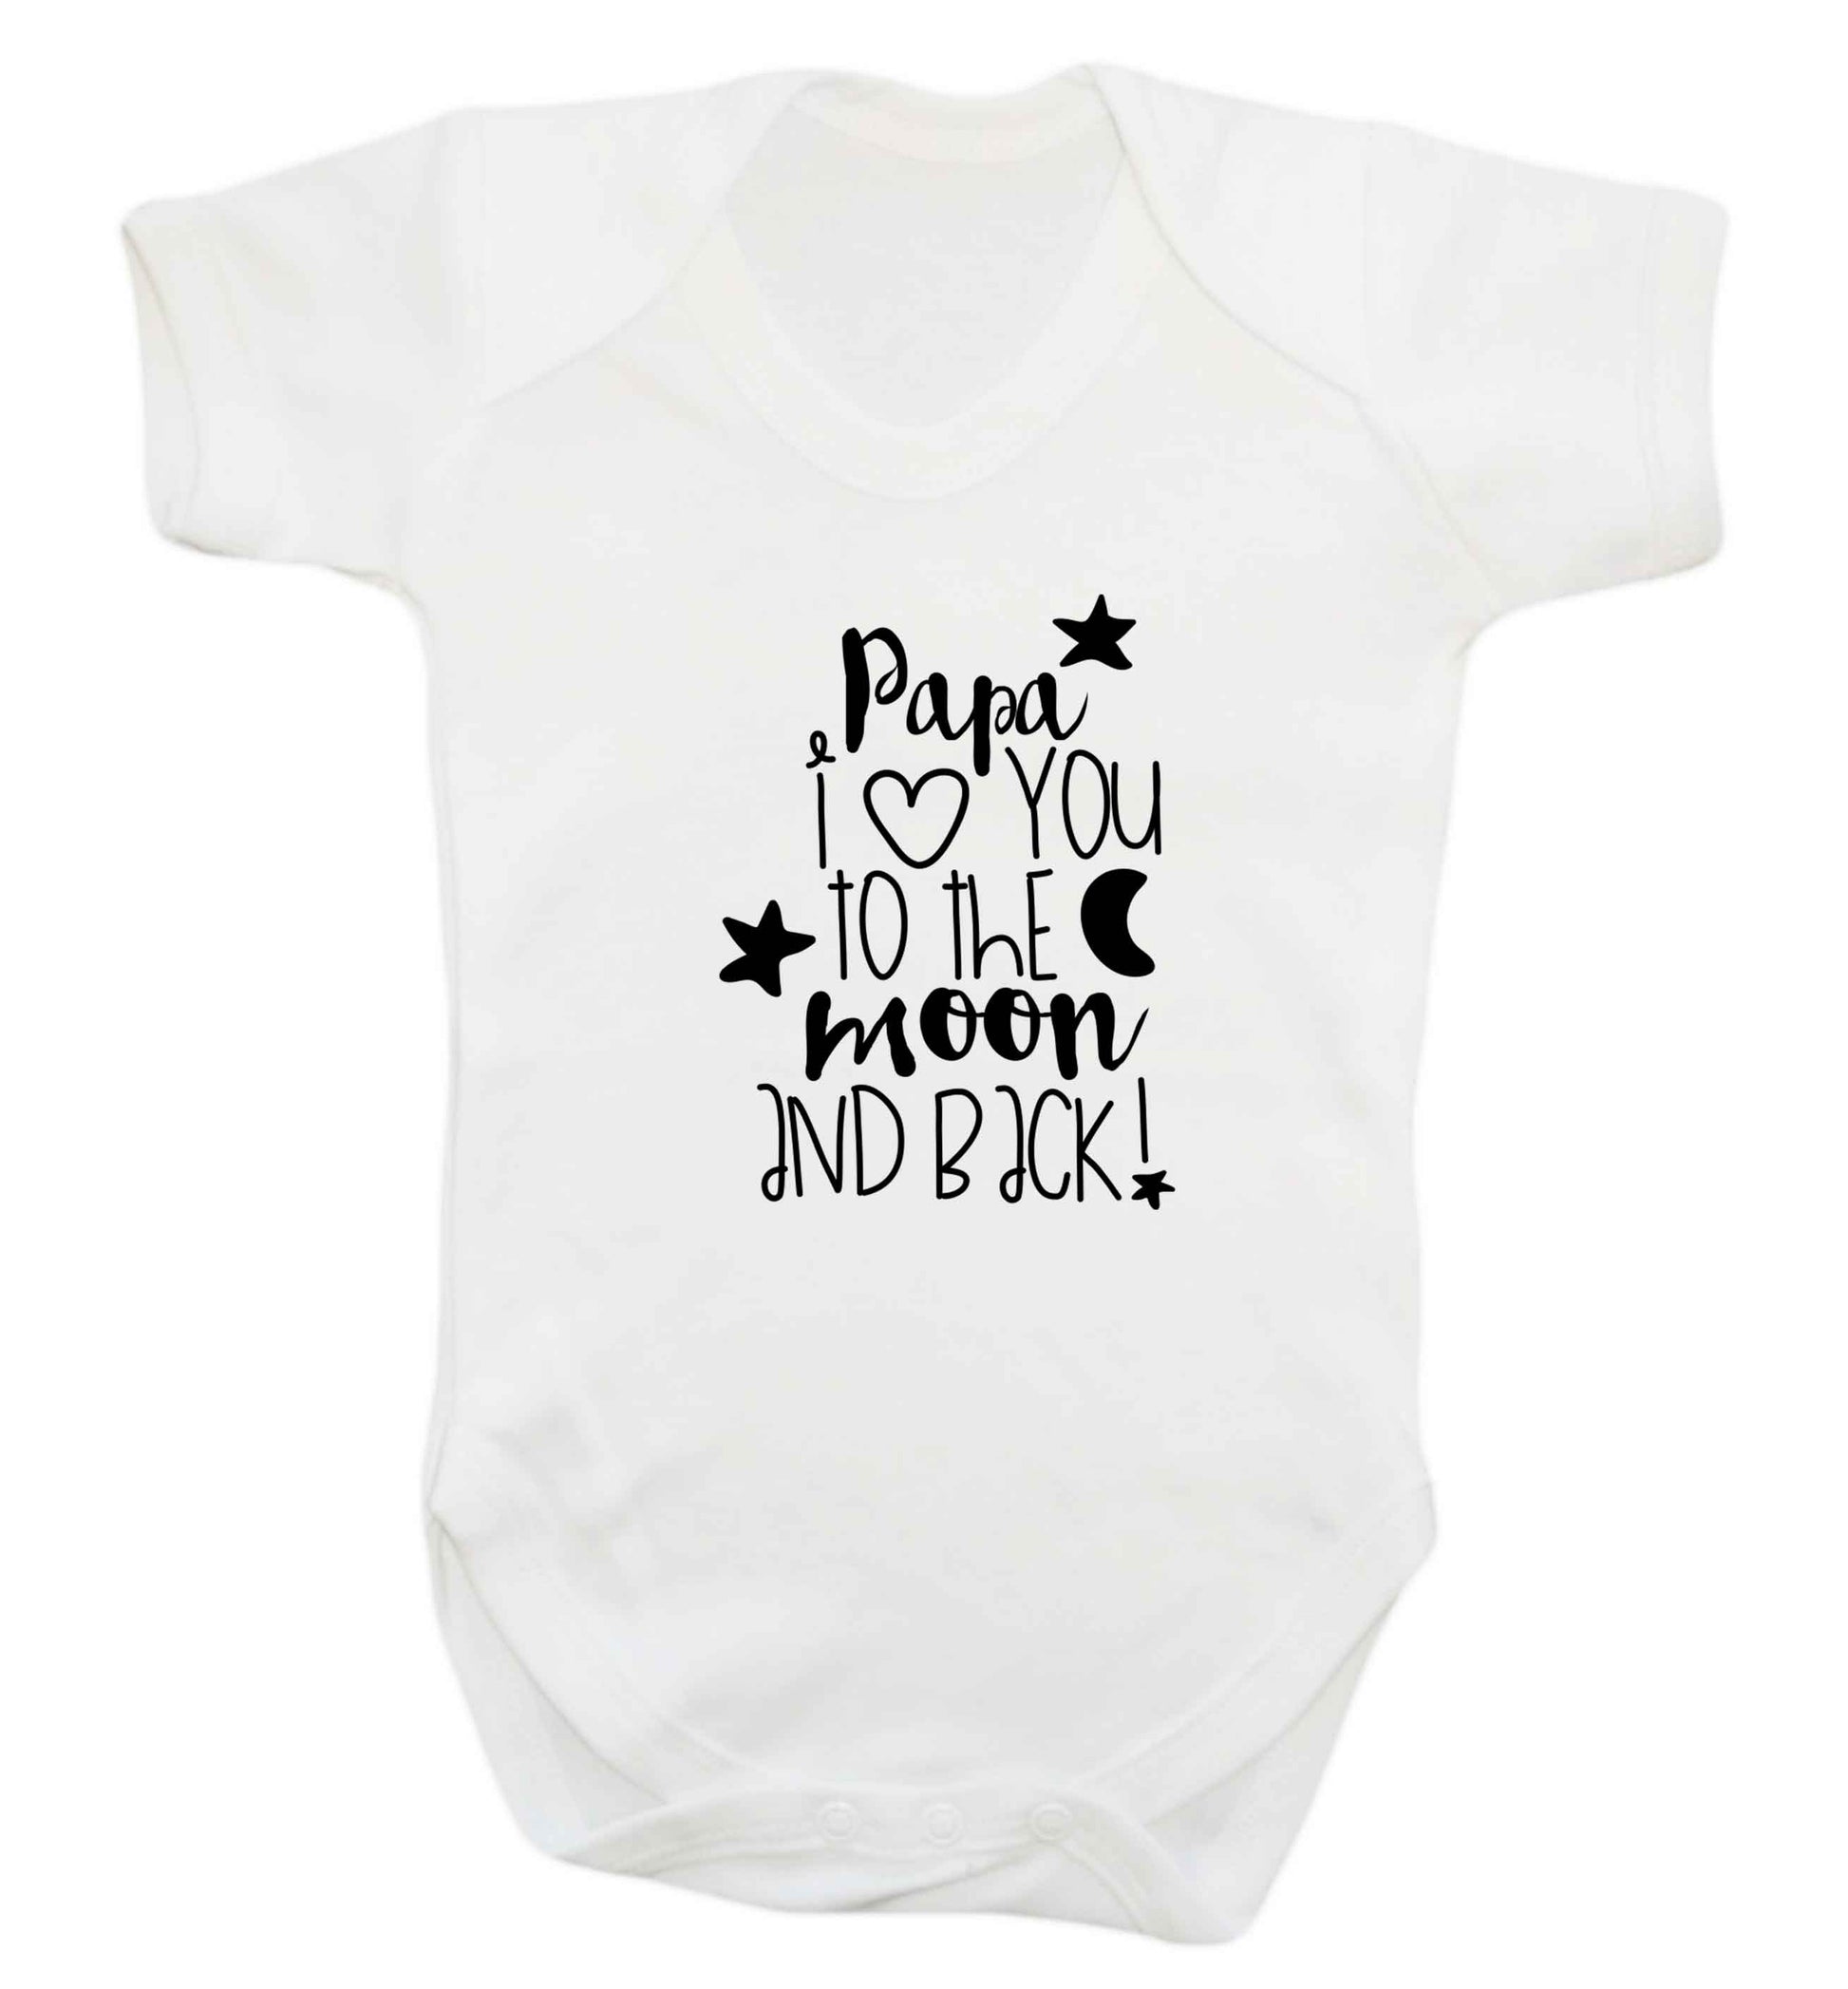 Papa I love you to the moon and back baby vest white 18-24 months